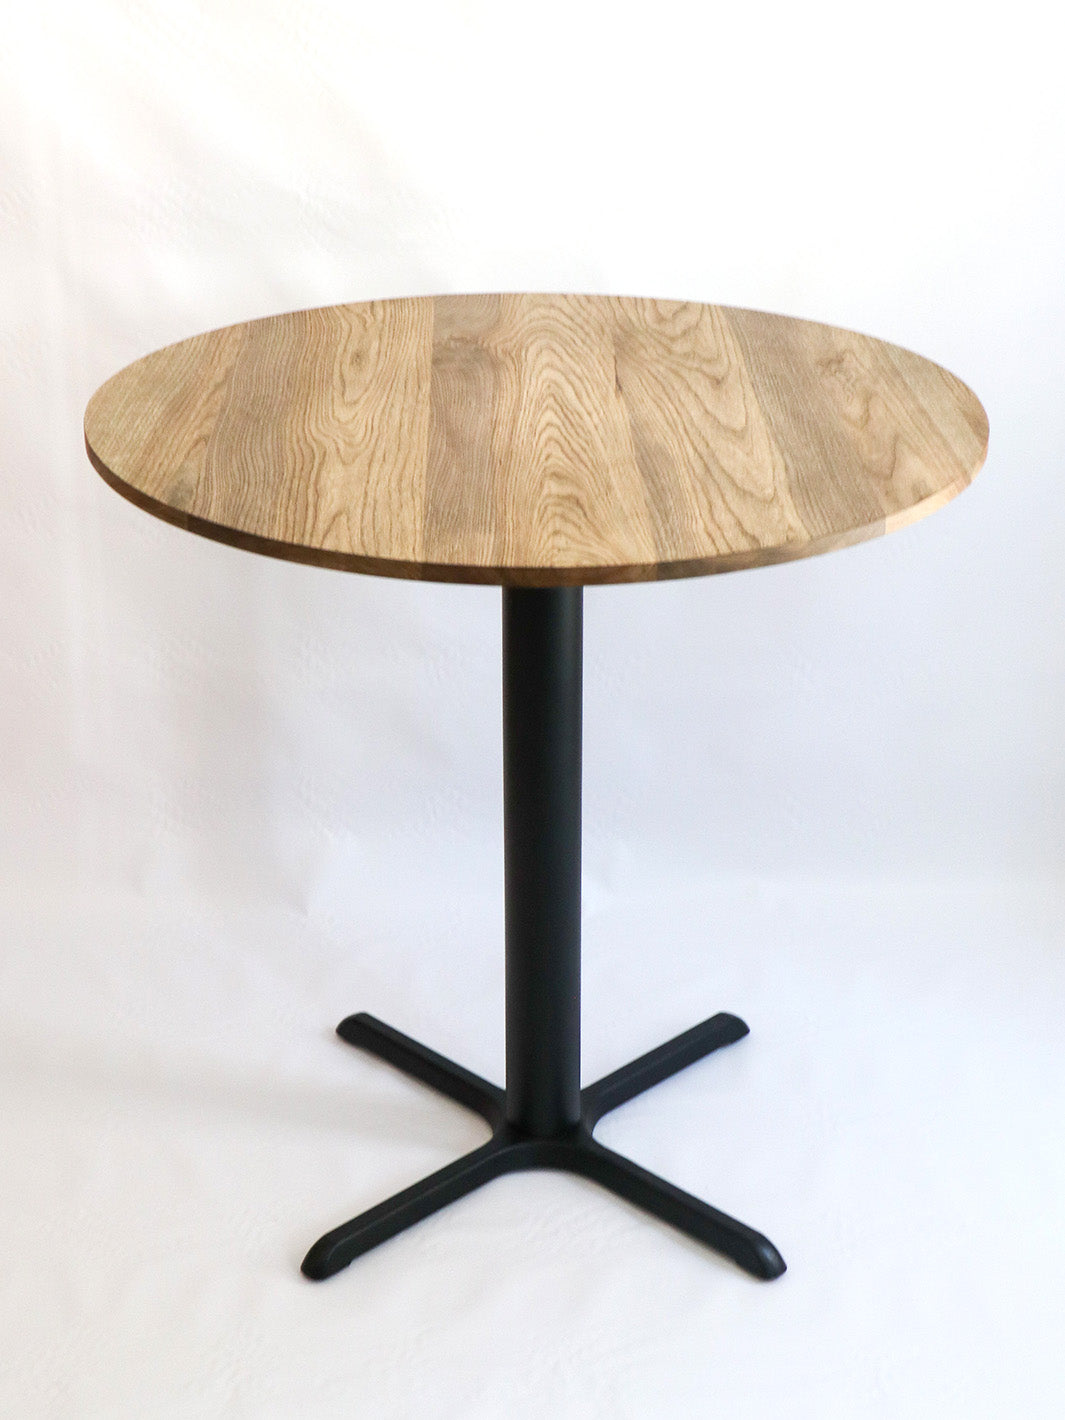 Modern Round Hackberry Pub Table with Black Steel Legs | Bar or Standard Height Earthly Comfort dining table 1529-4